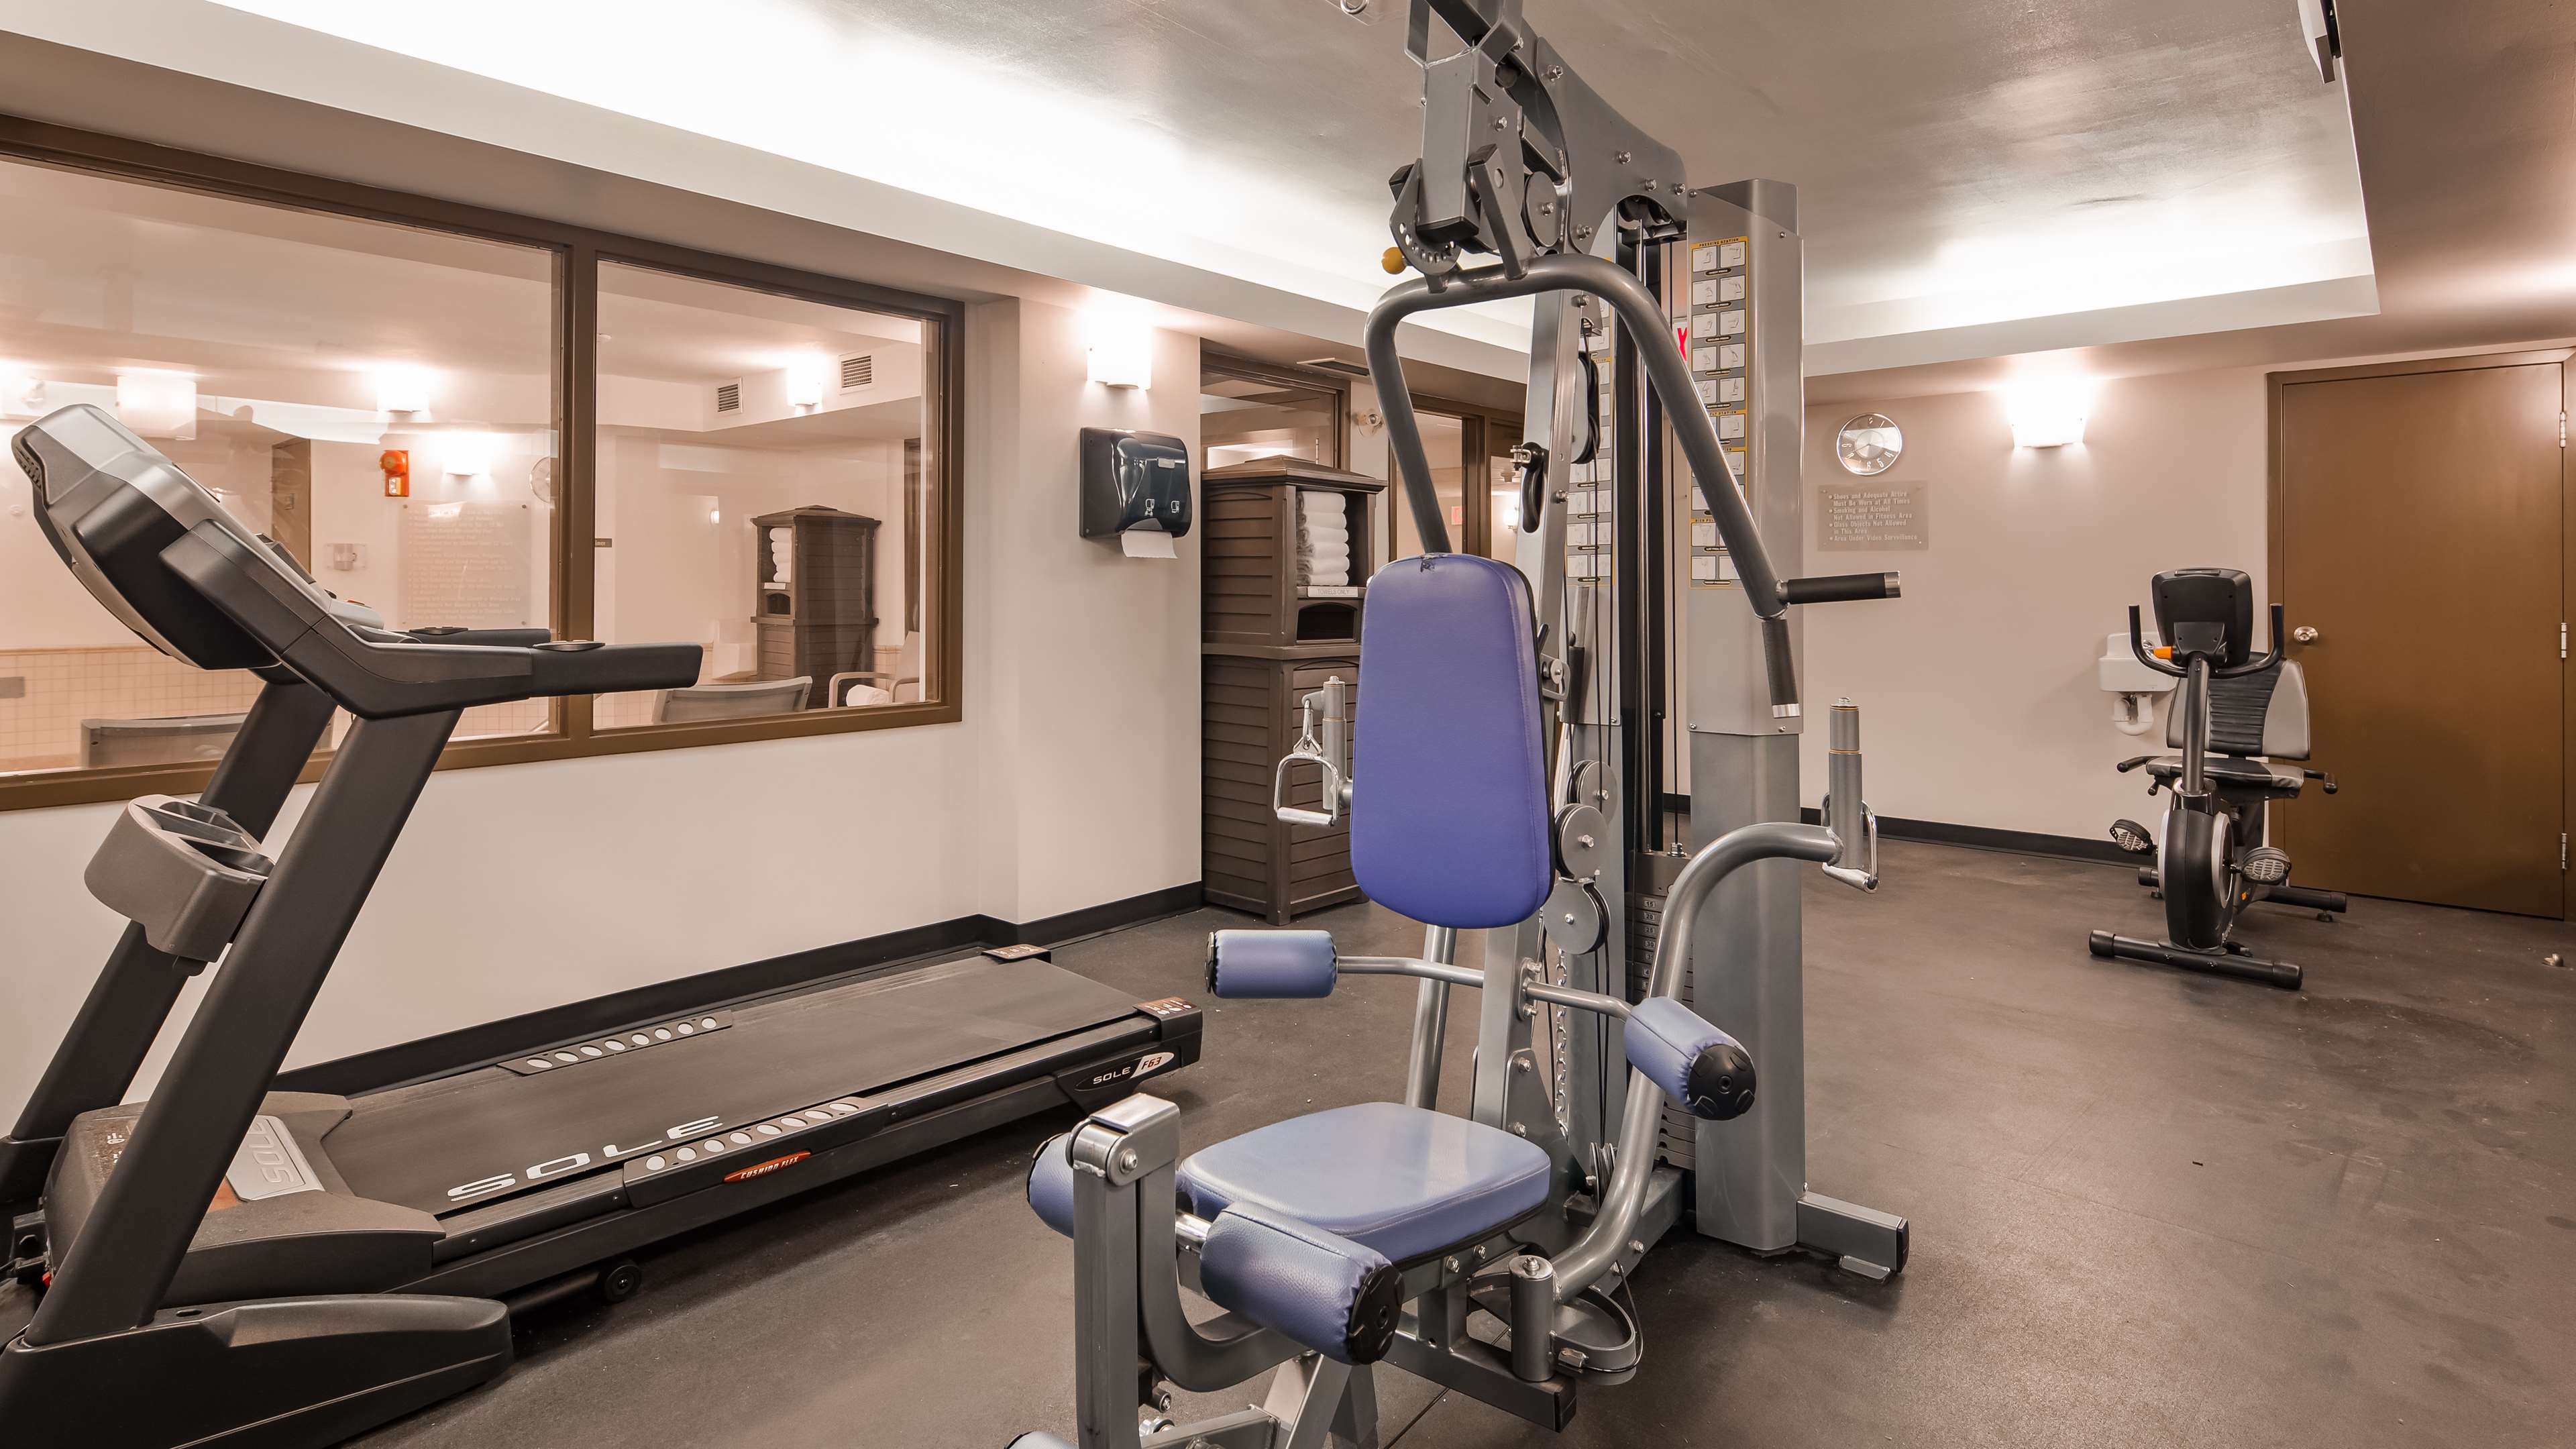 Best Western Airdrie in Airdrie: Fitness Center is located on the Lower Level near Hot Tub and Guest Laundry.